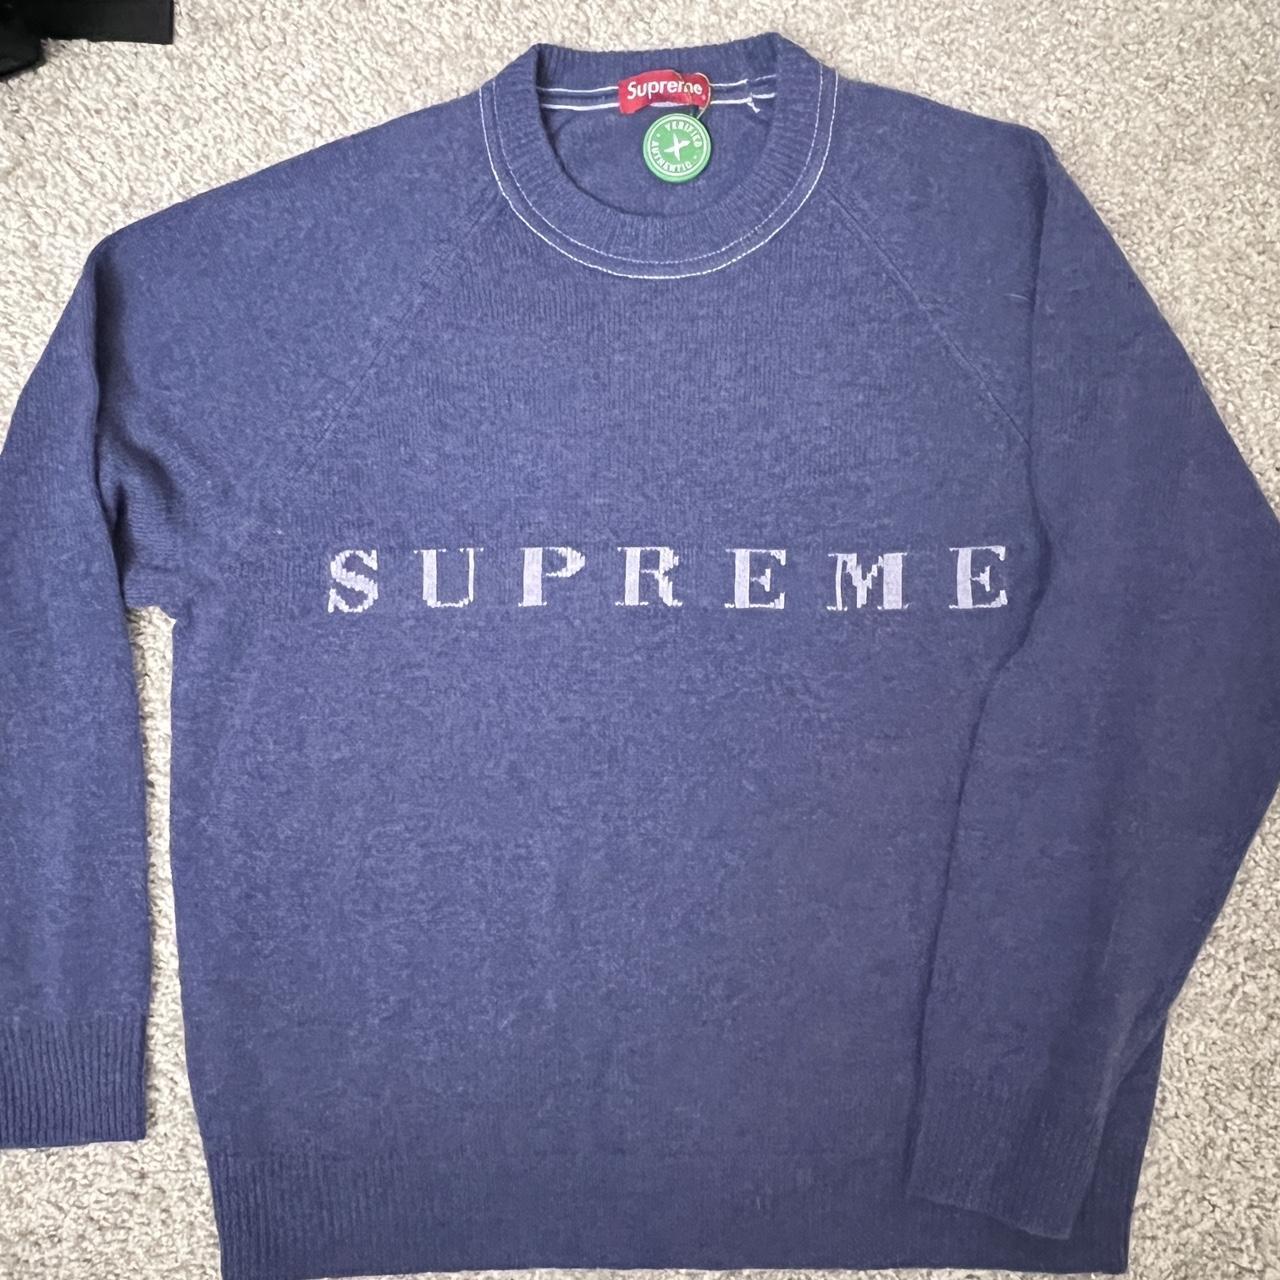 Brand New! Supreme Fall/Winter 2020 Stone Washed... - Depop